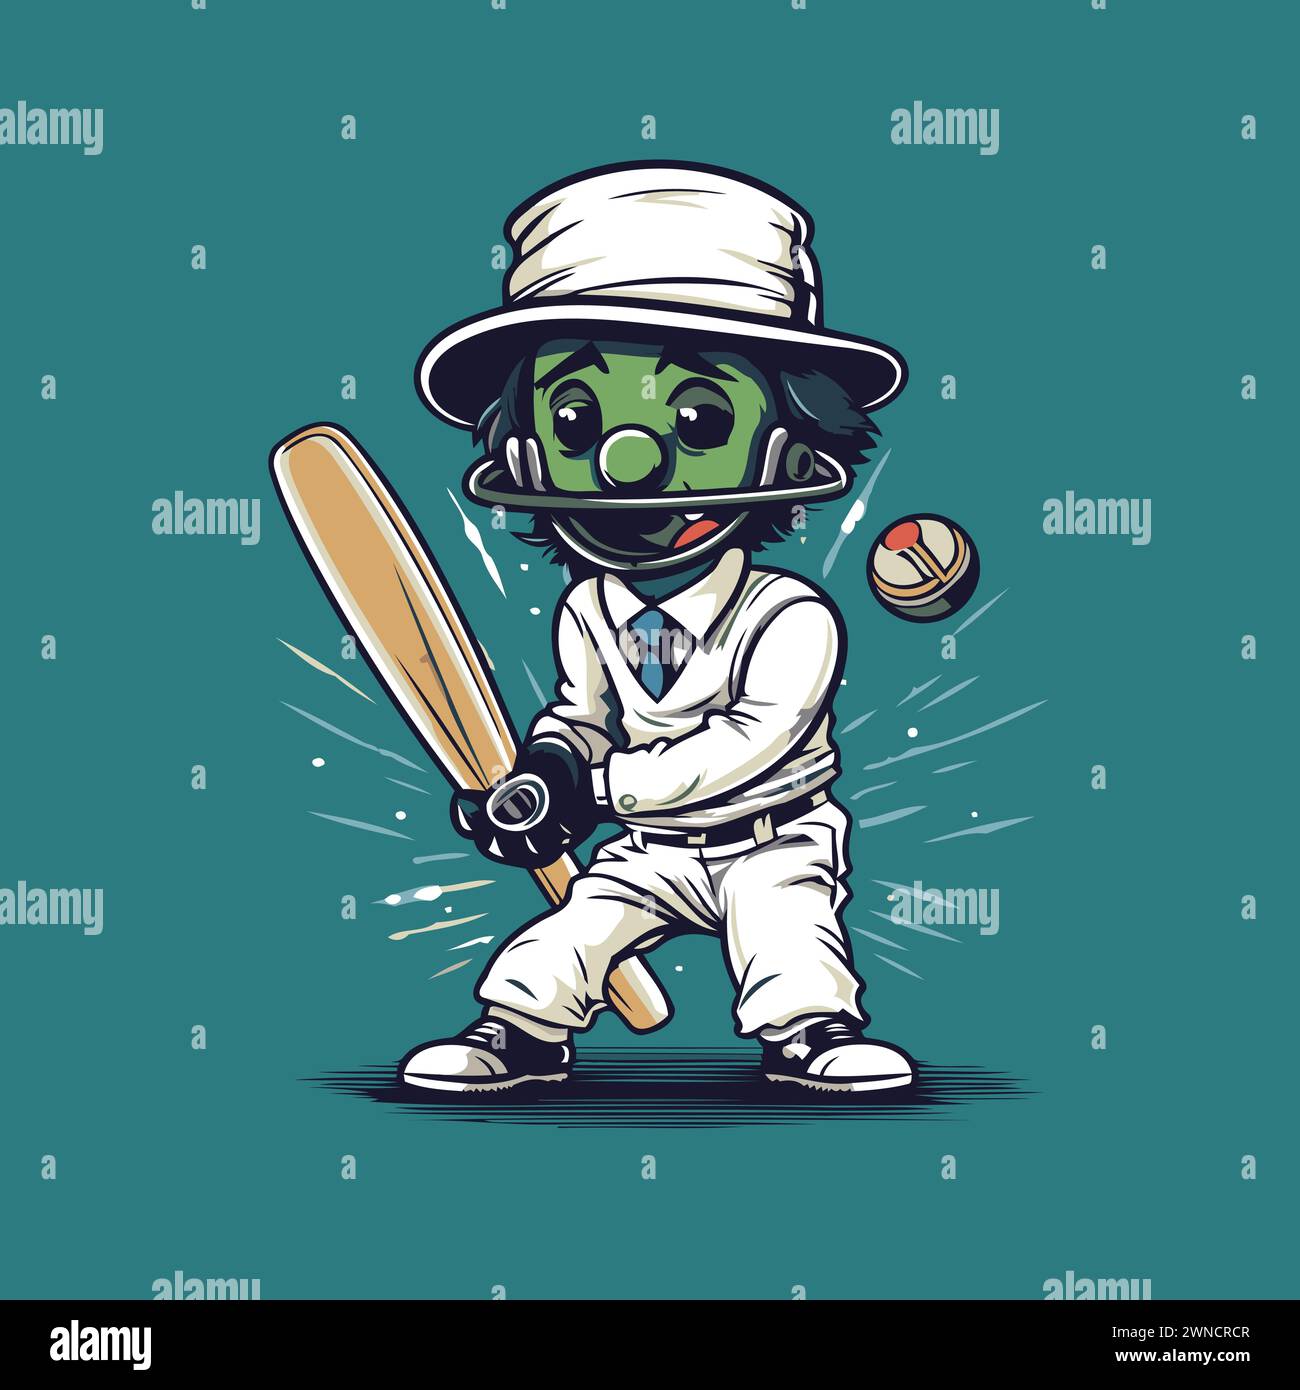 Cricket player with bat. ball and helmet. Vector illustration. Stock Vector